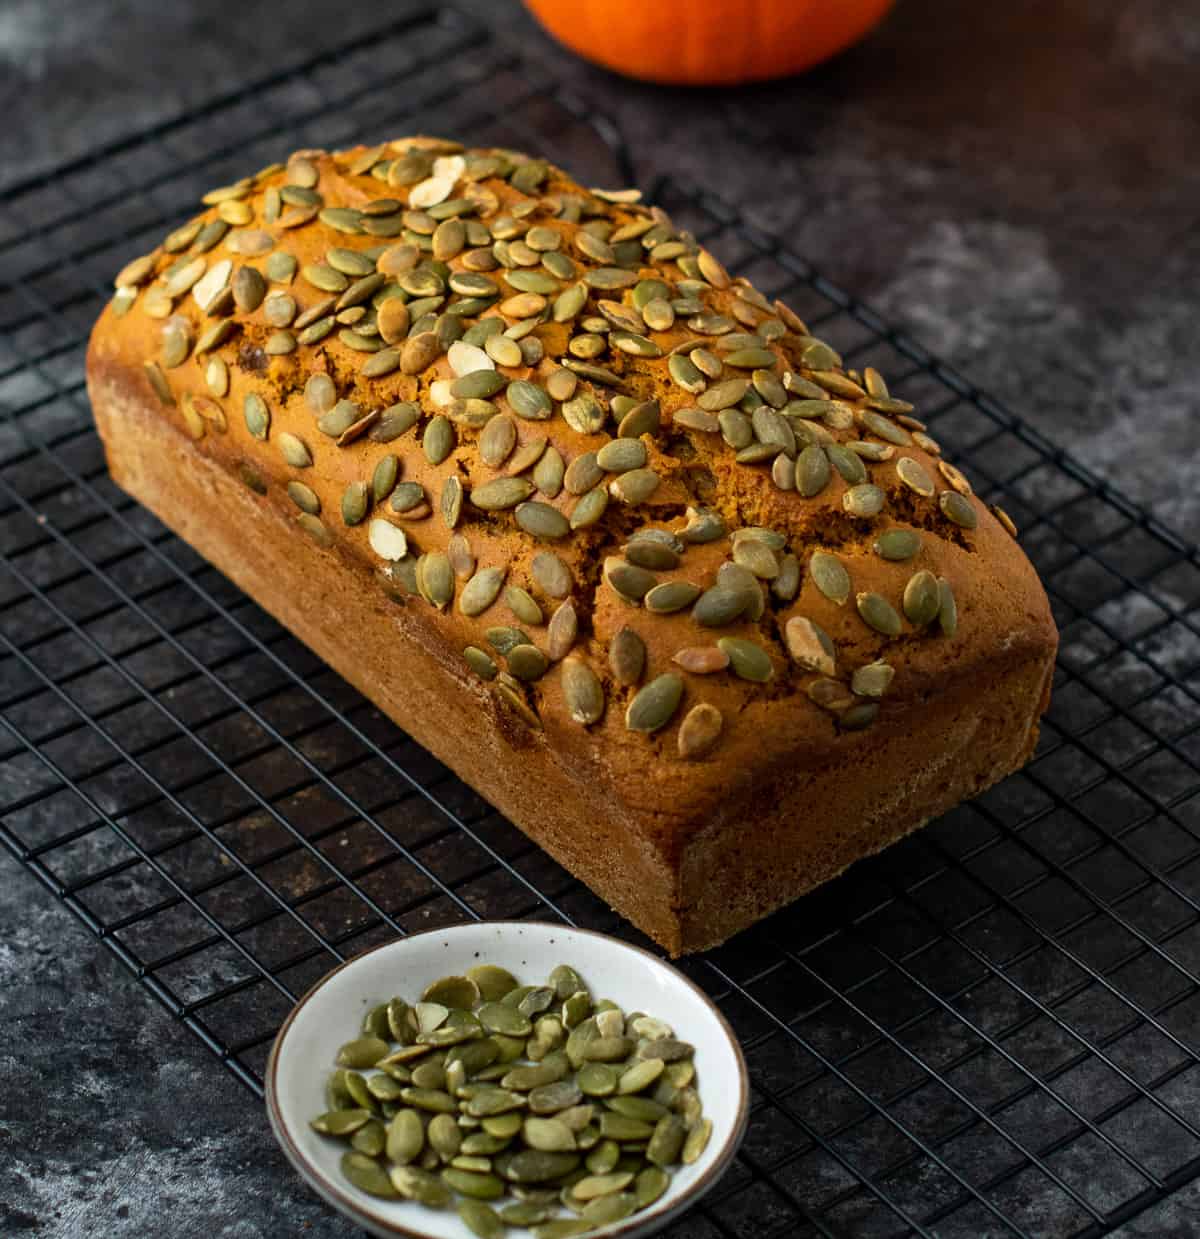 Cooling the pumpkin bread on a rack